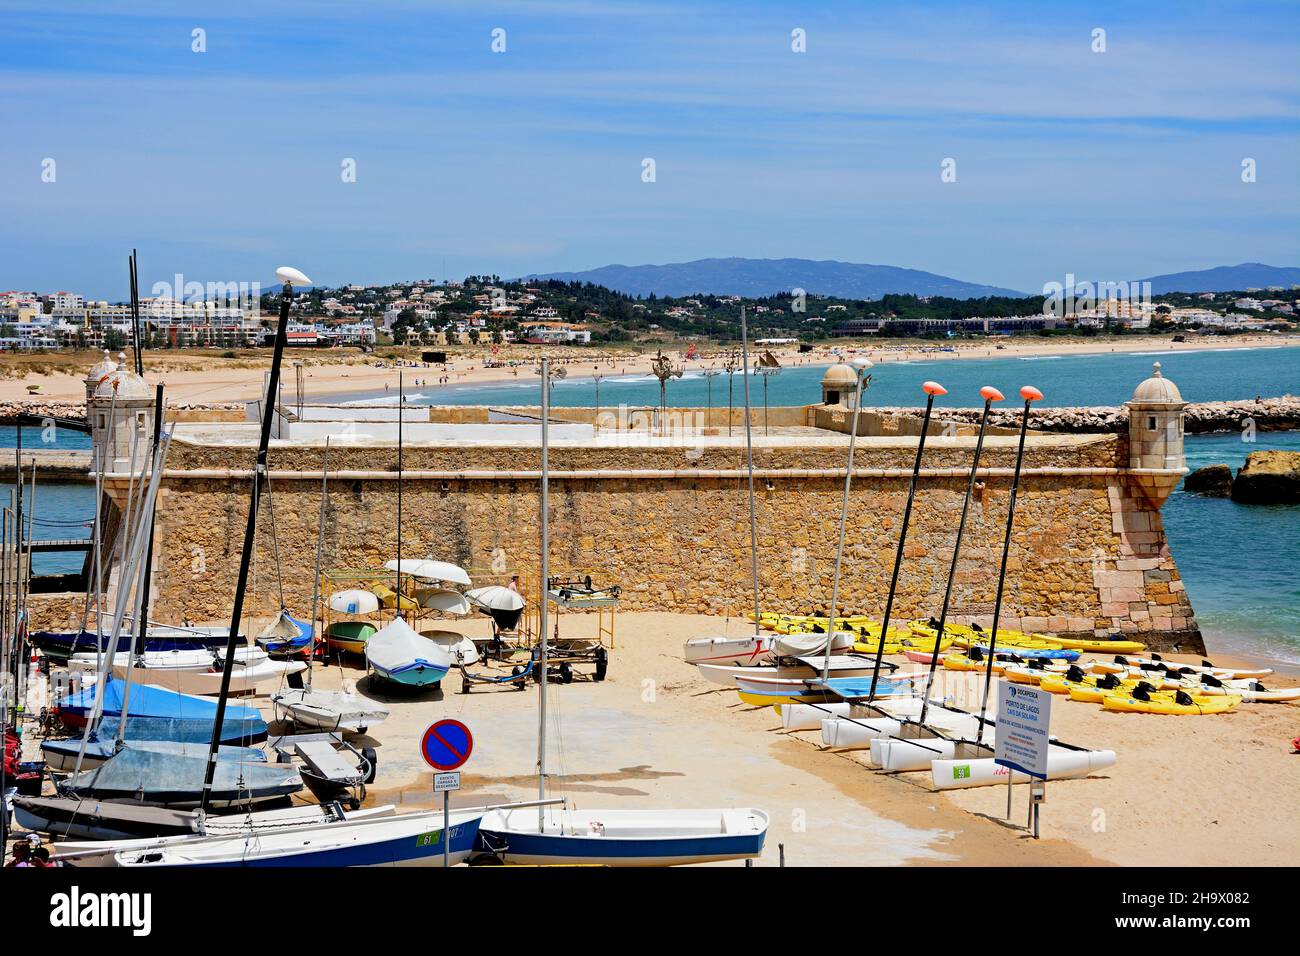 Elevated view of the Ponta da Bandeira Fort with boats in the foreground and views towards the beach, Lagos, Algarve, Portugal, Europe. Stock Photo